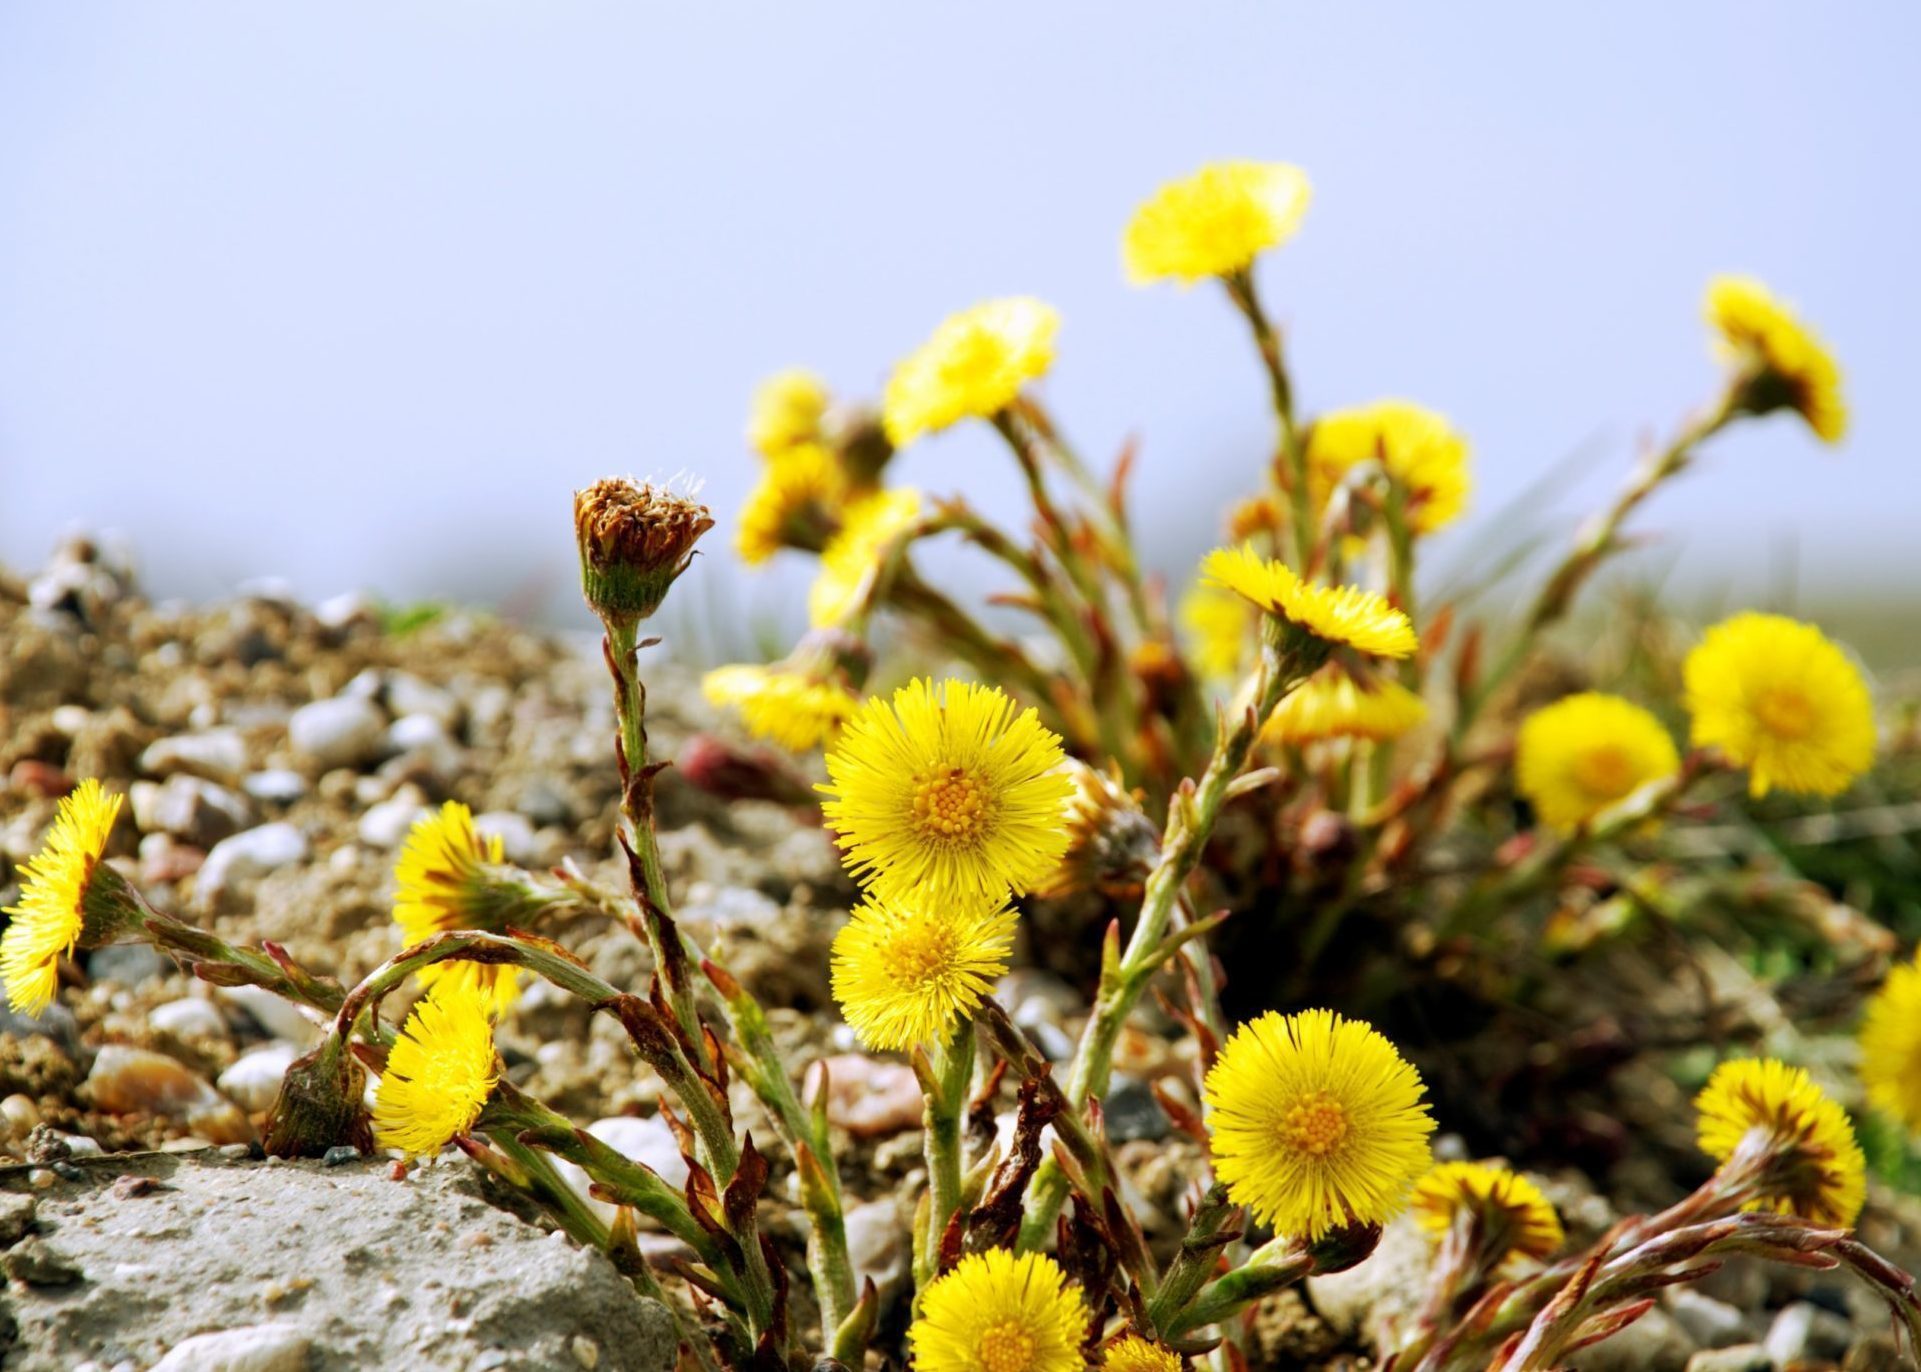 Delicate yellow flowers resembling small dandelions.